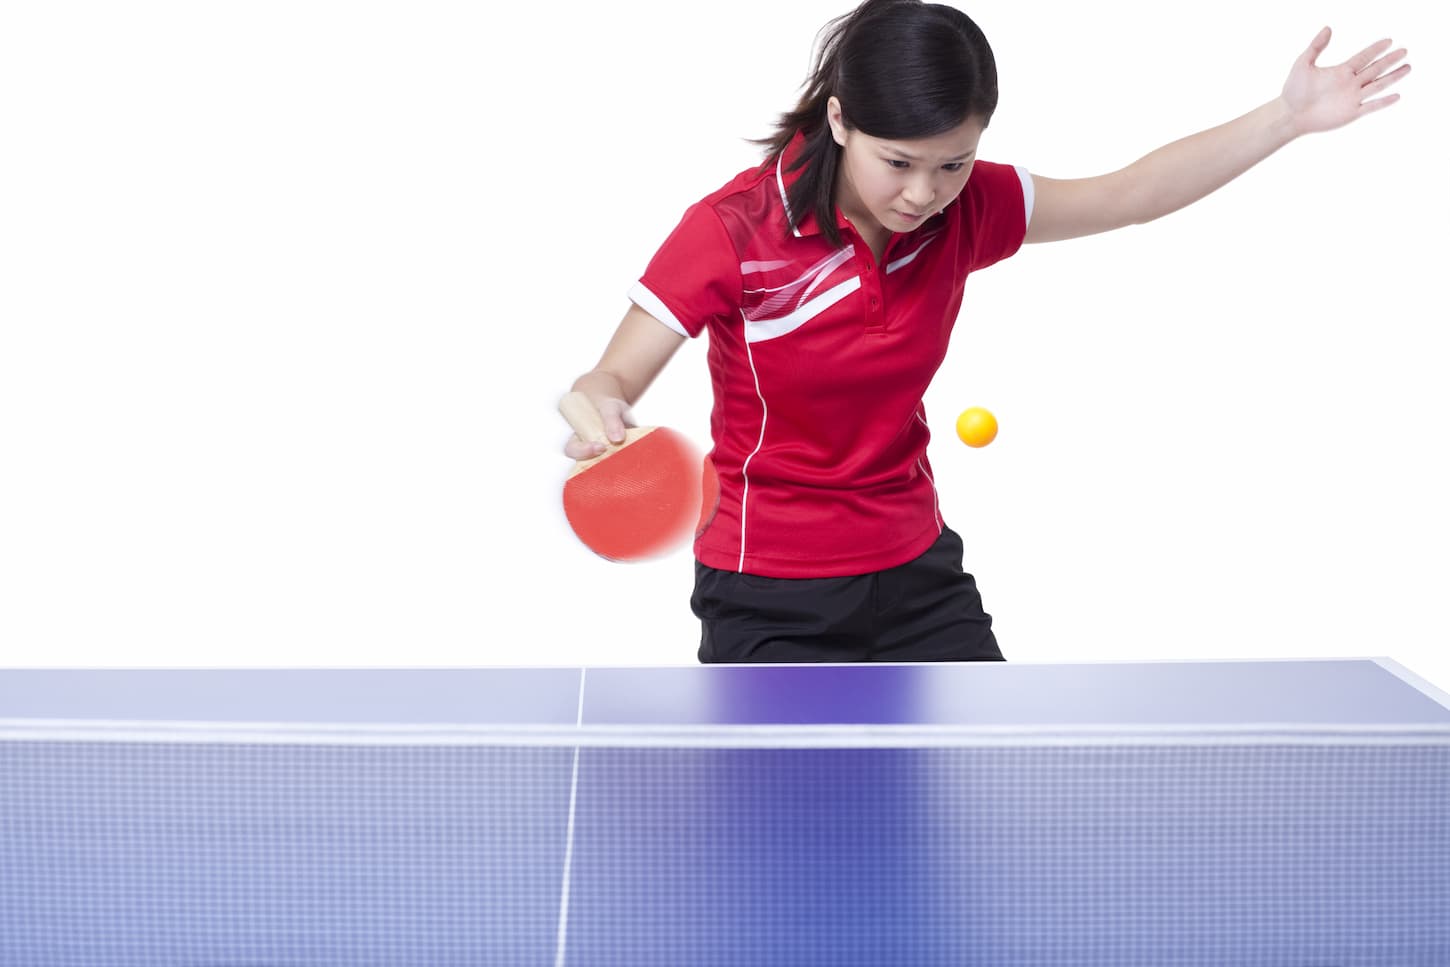 An image of a female athlete playing table tennis.